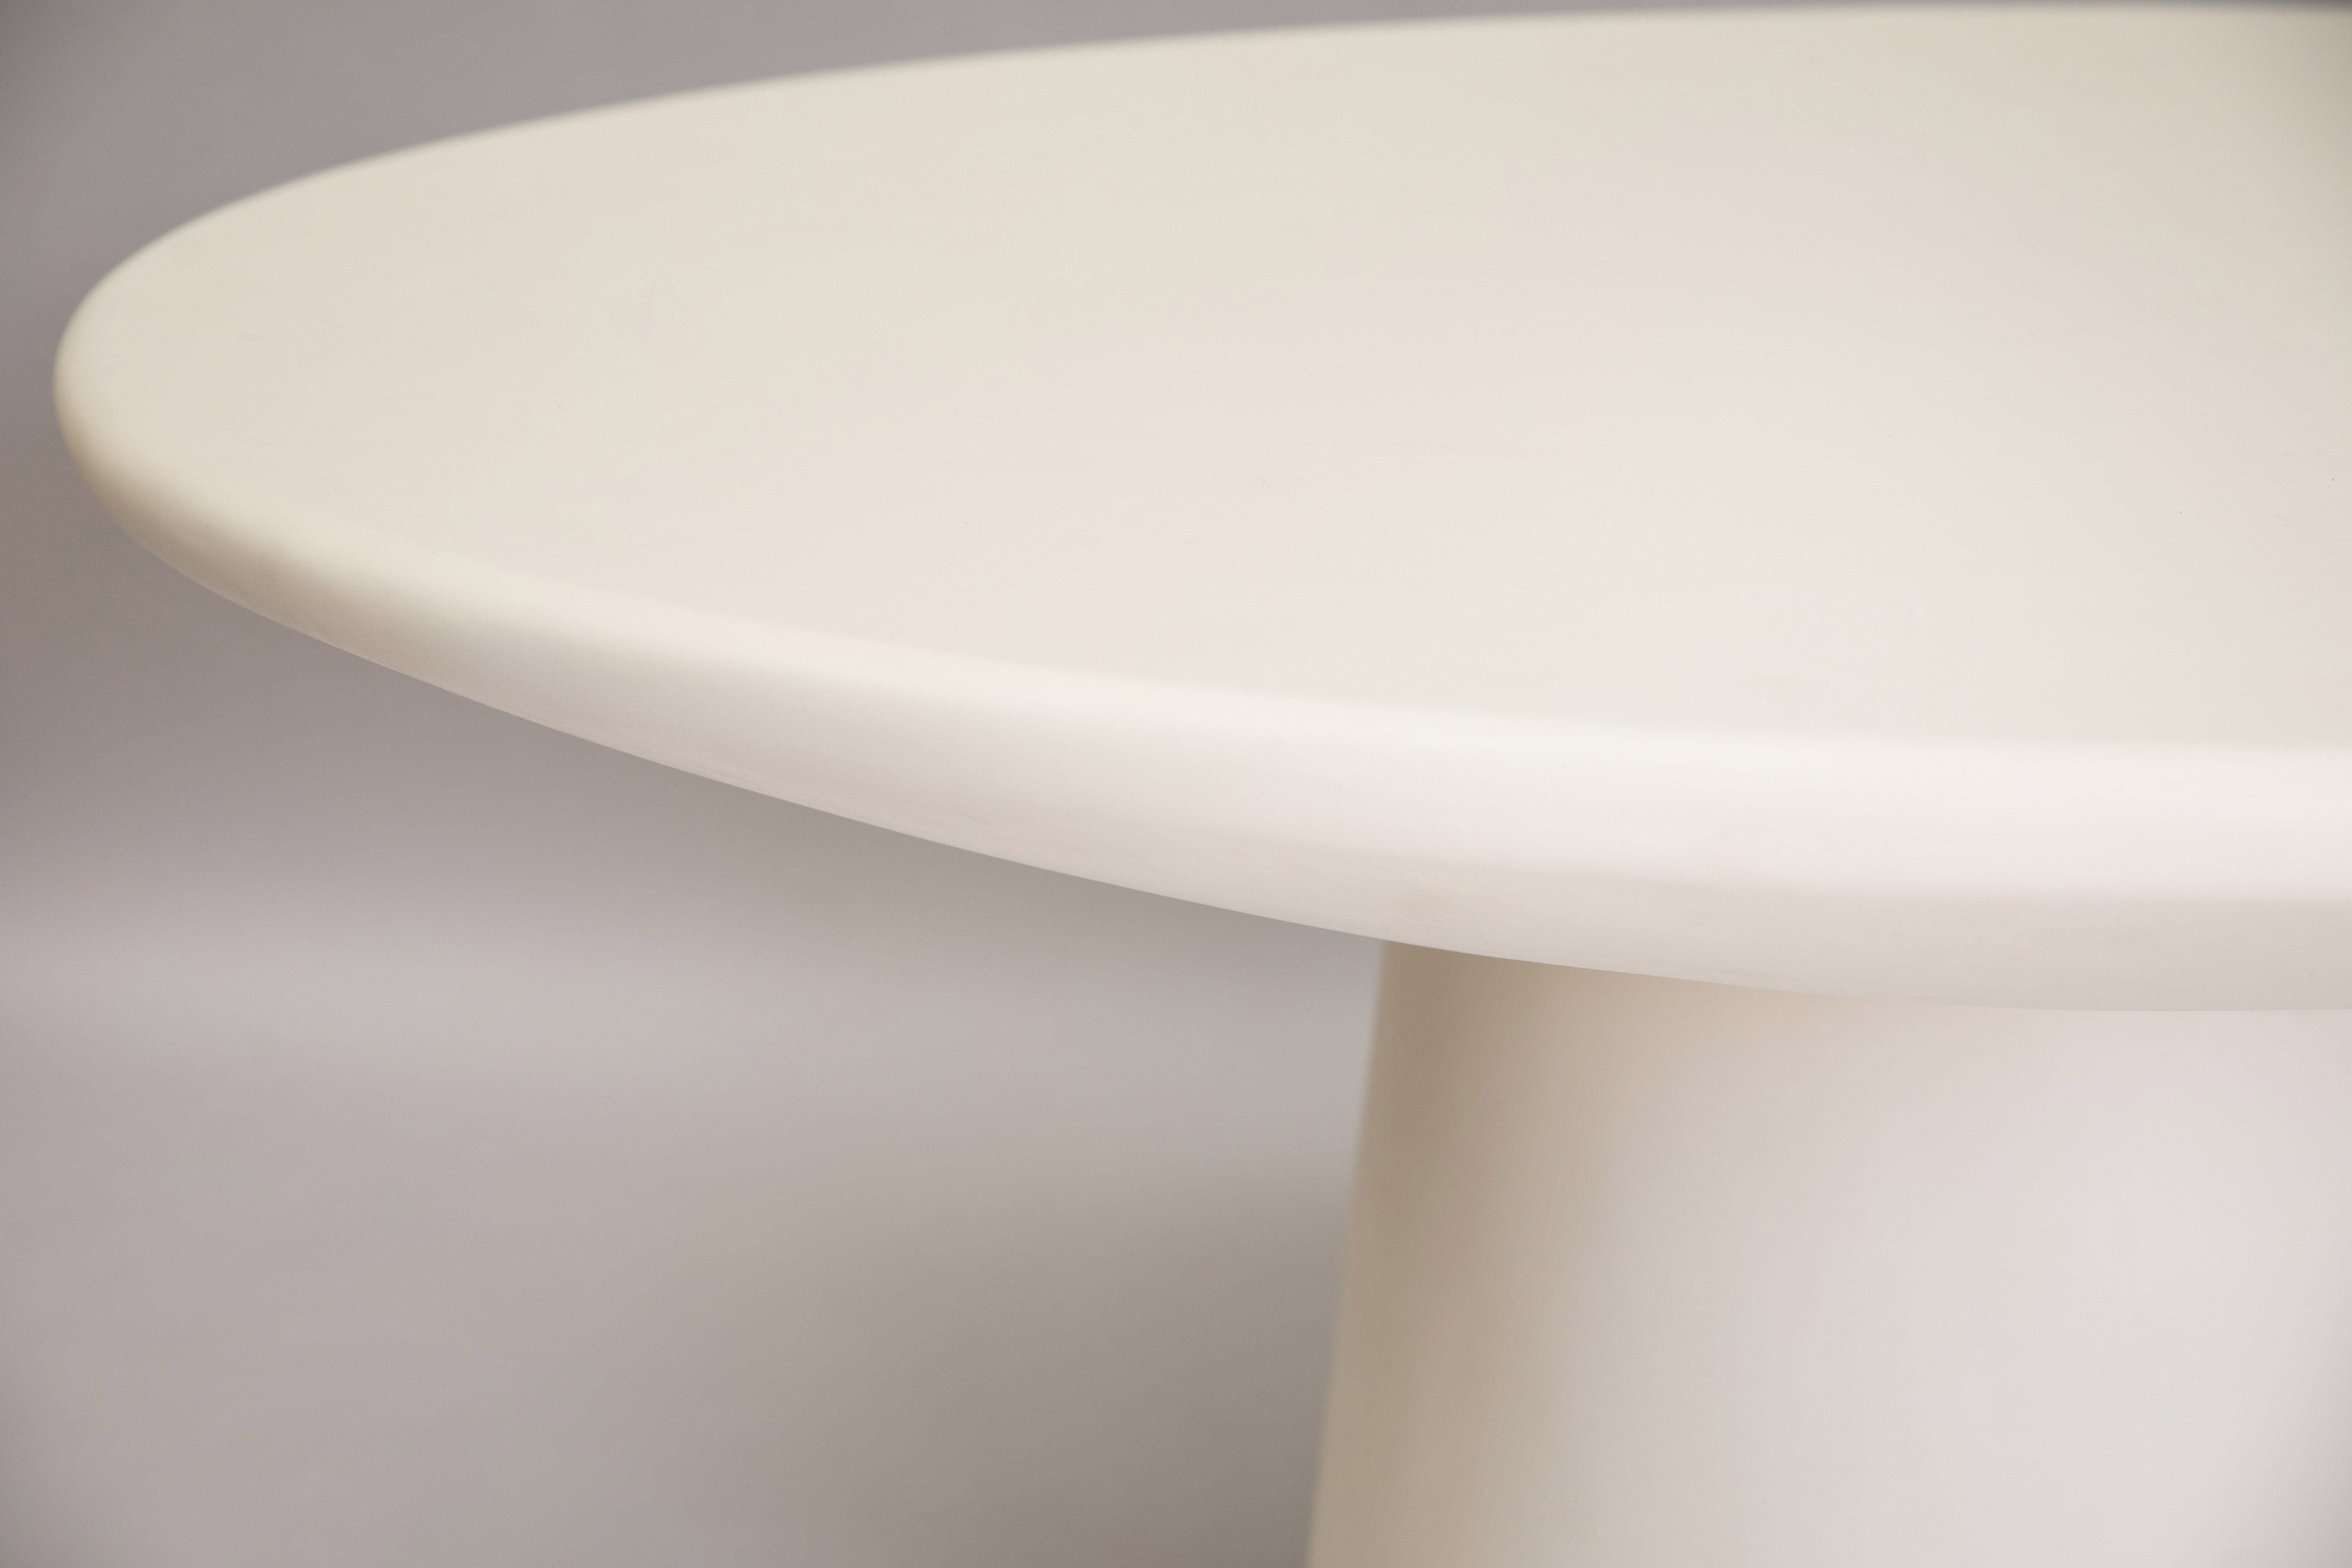 roly poly replica dining table